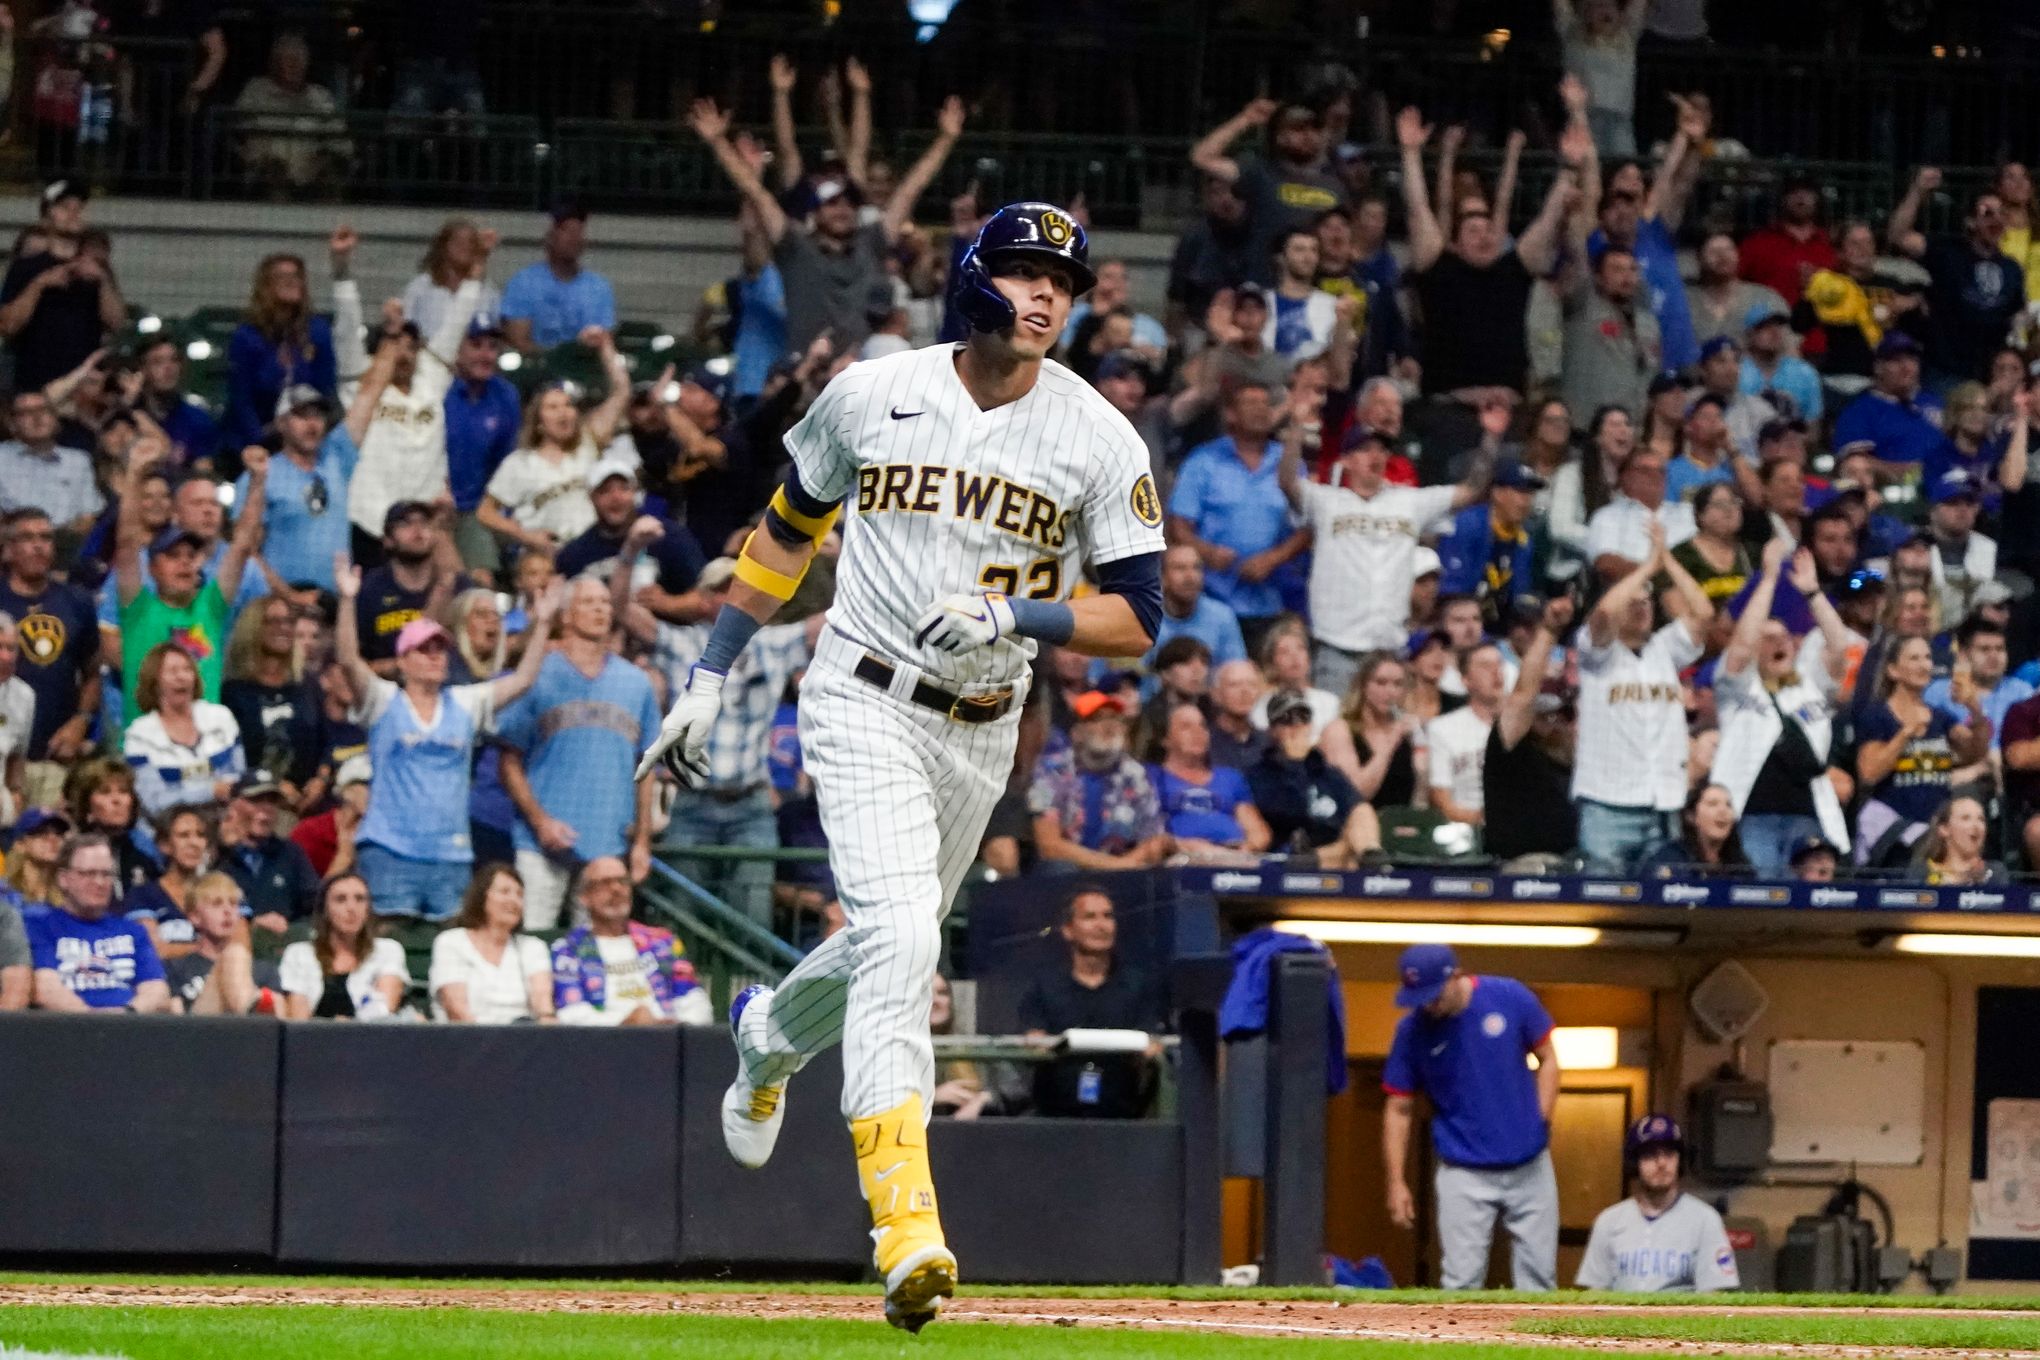 Garrett Mitchell could be the spark the Brewers need